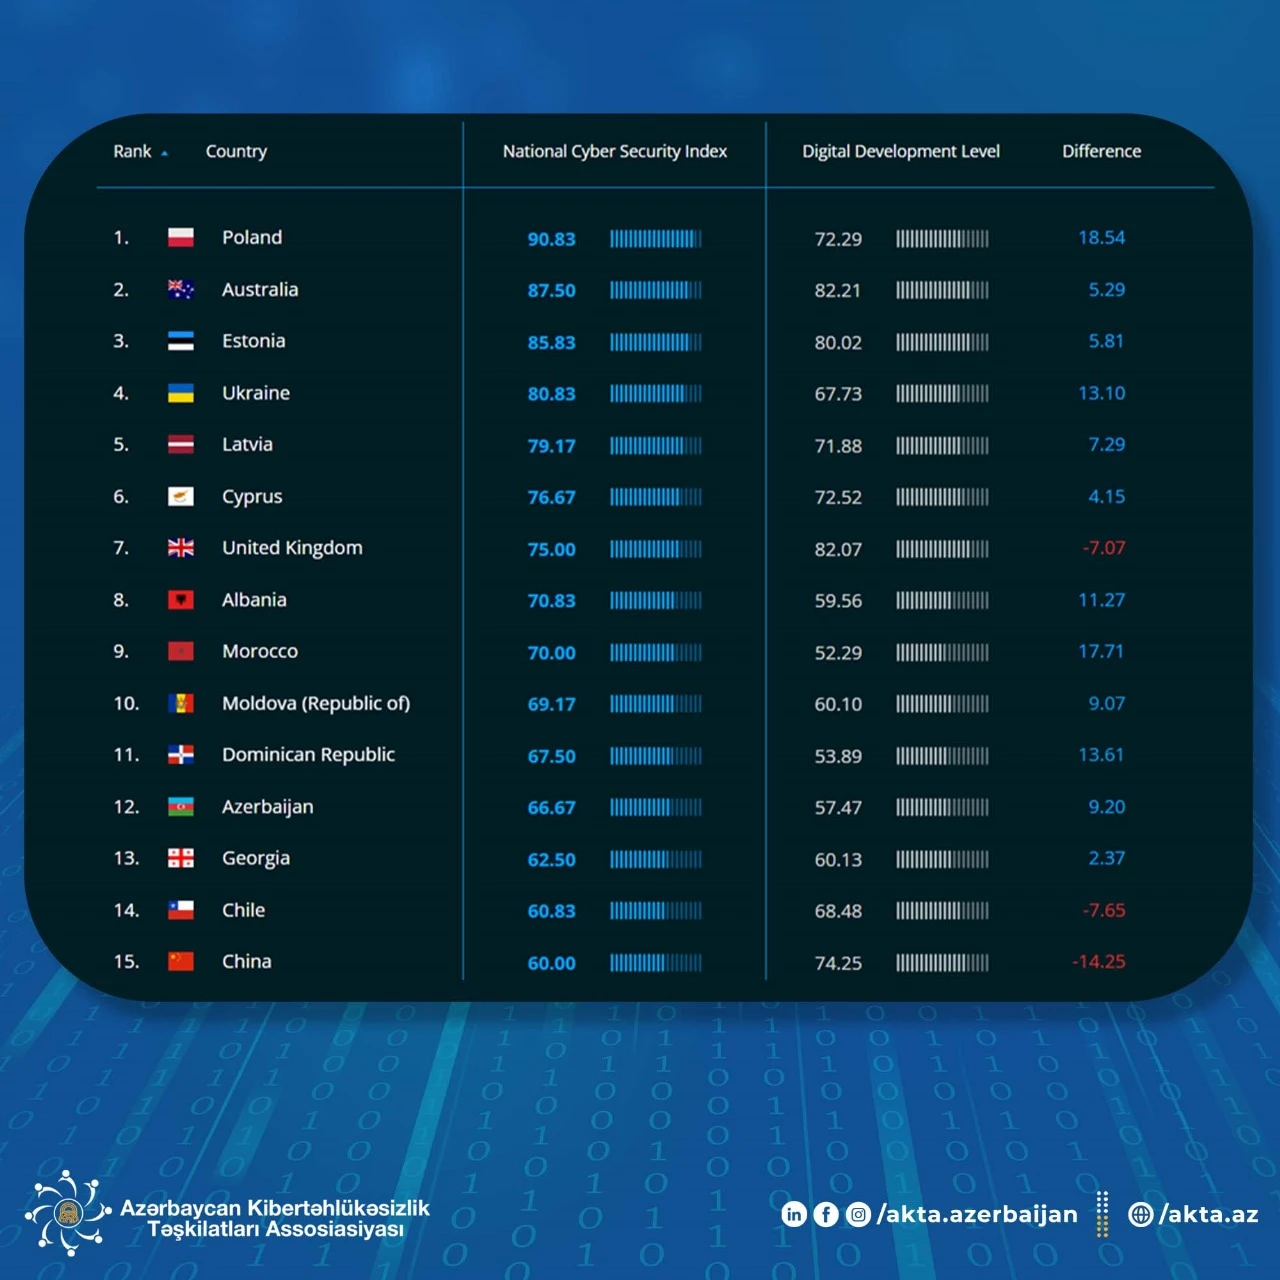 Azerbaijan has achieved the highest indicator in the Cybersecurity Index so far - 2